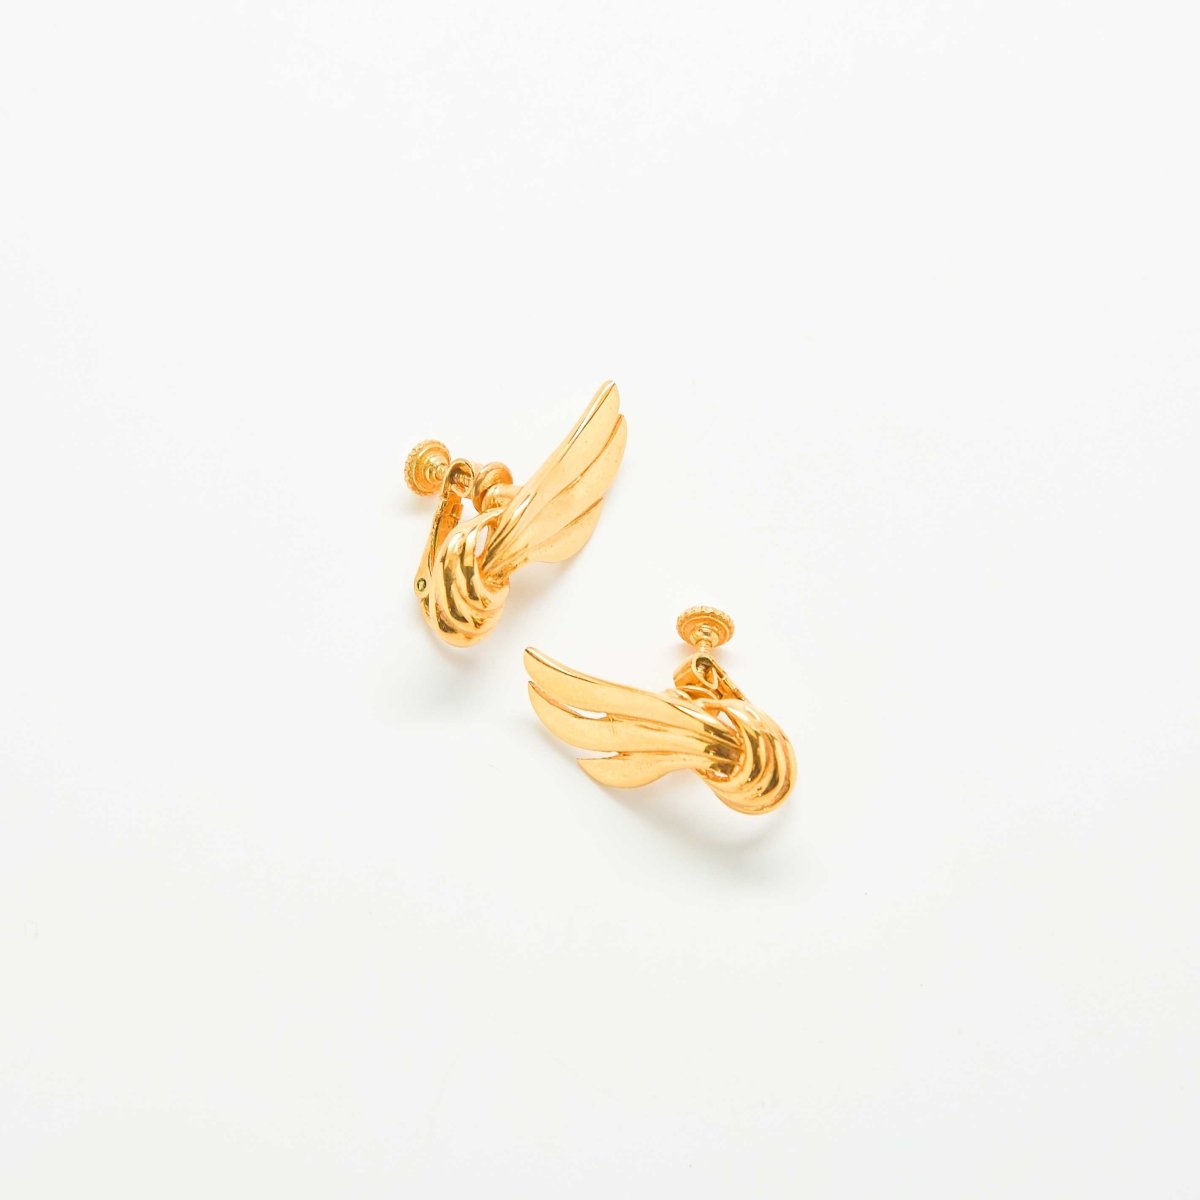 Vintage Napier Knotted Gold Wing Earrings - Admiral Row